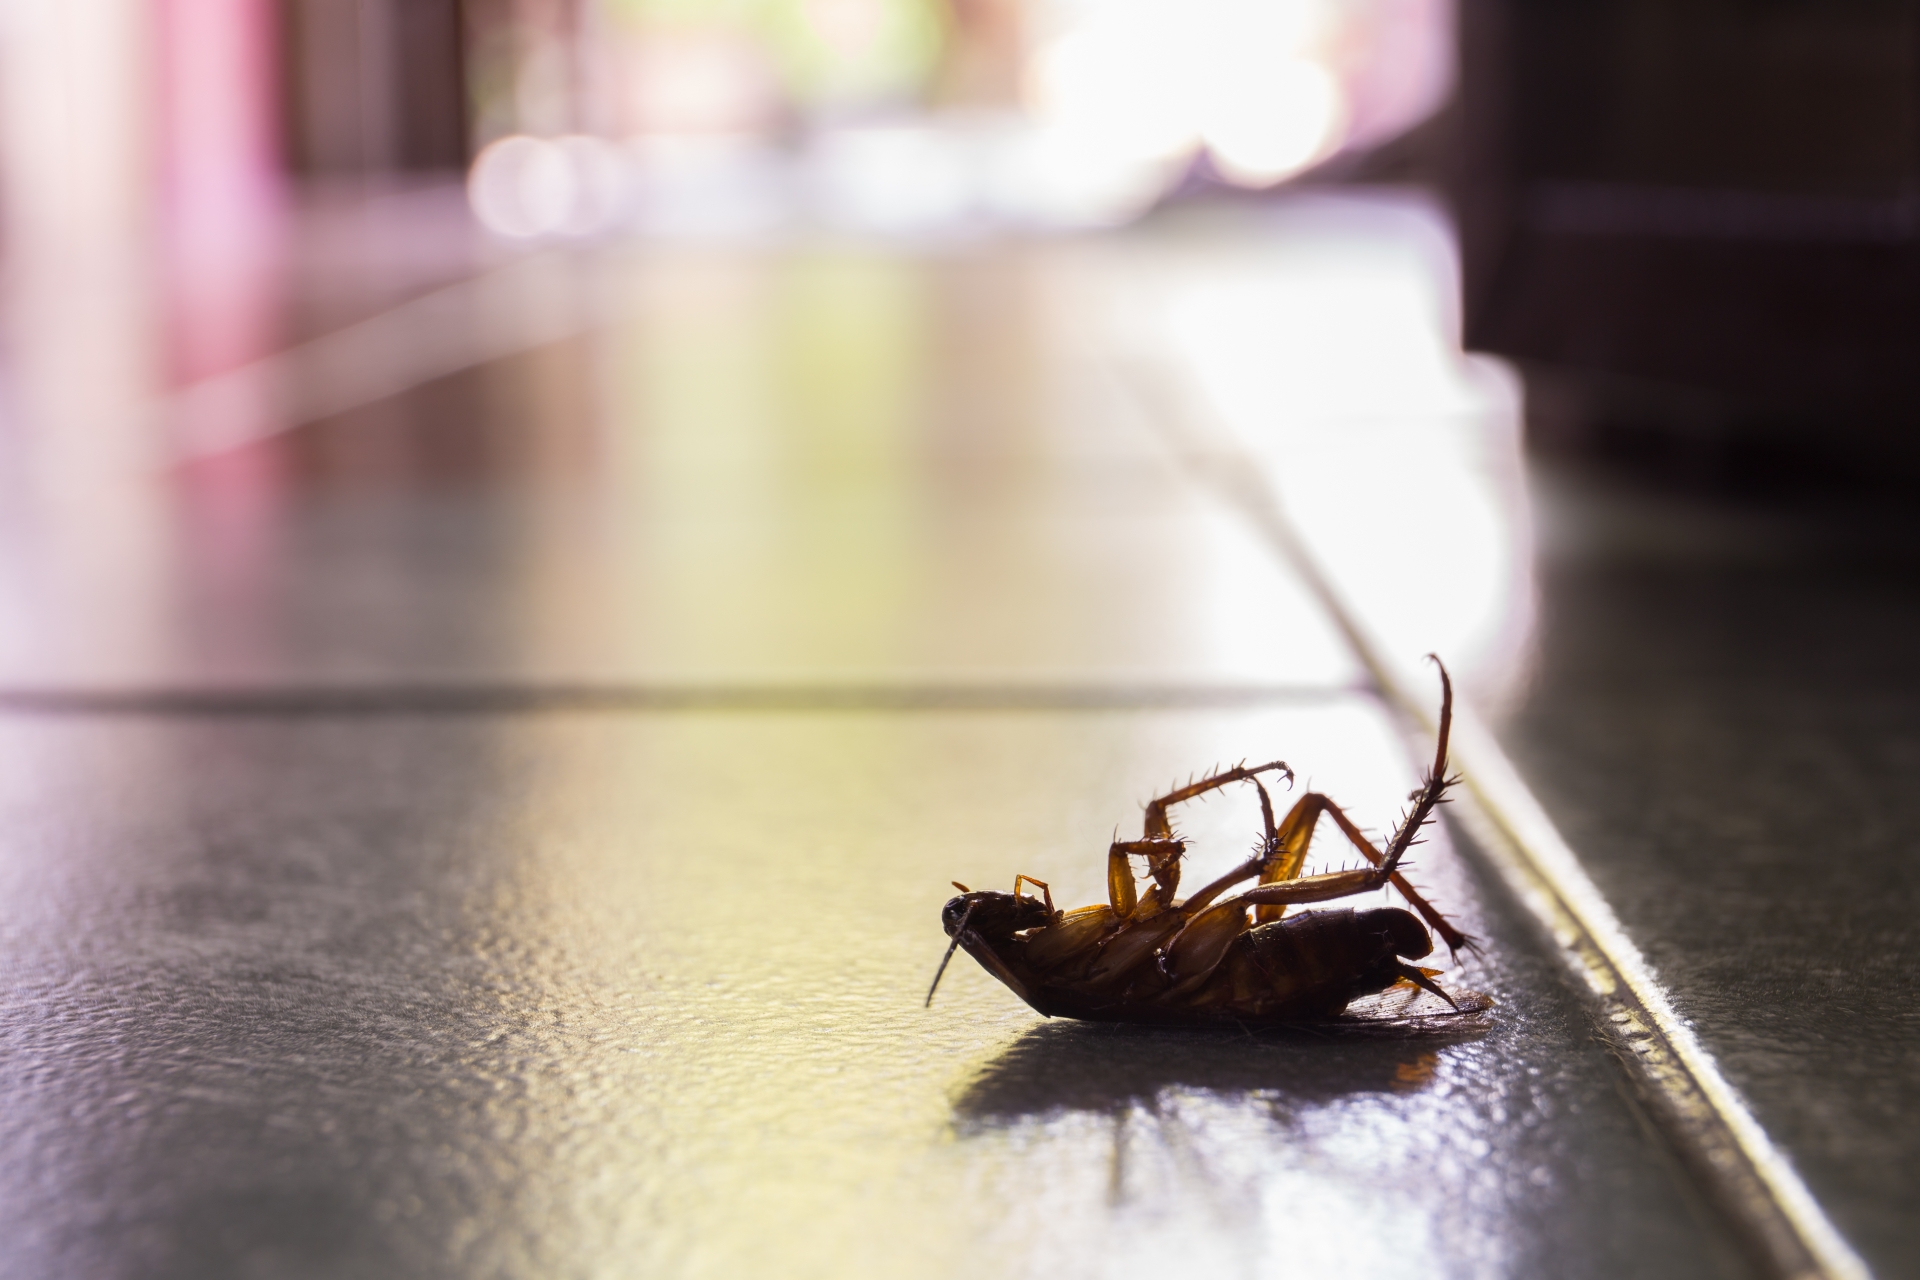 Cockroach Control, Pest Control in Seven Sisters, N15. Call Now 020 8166 9746